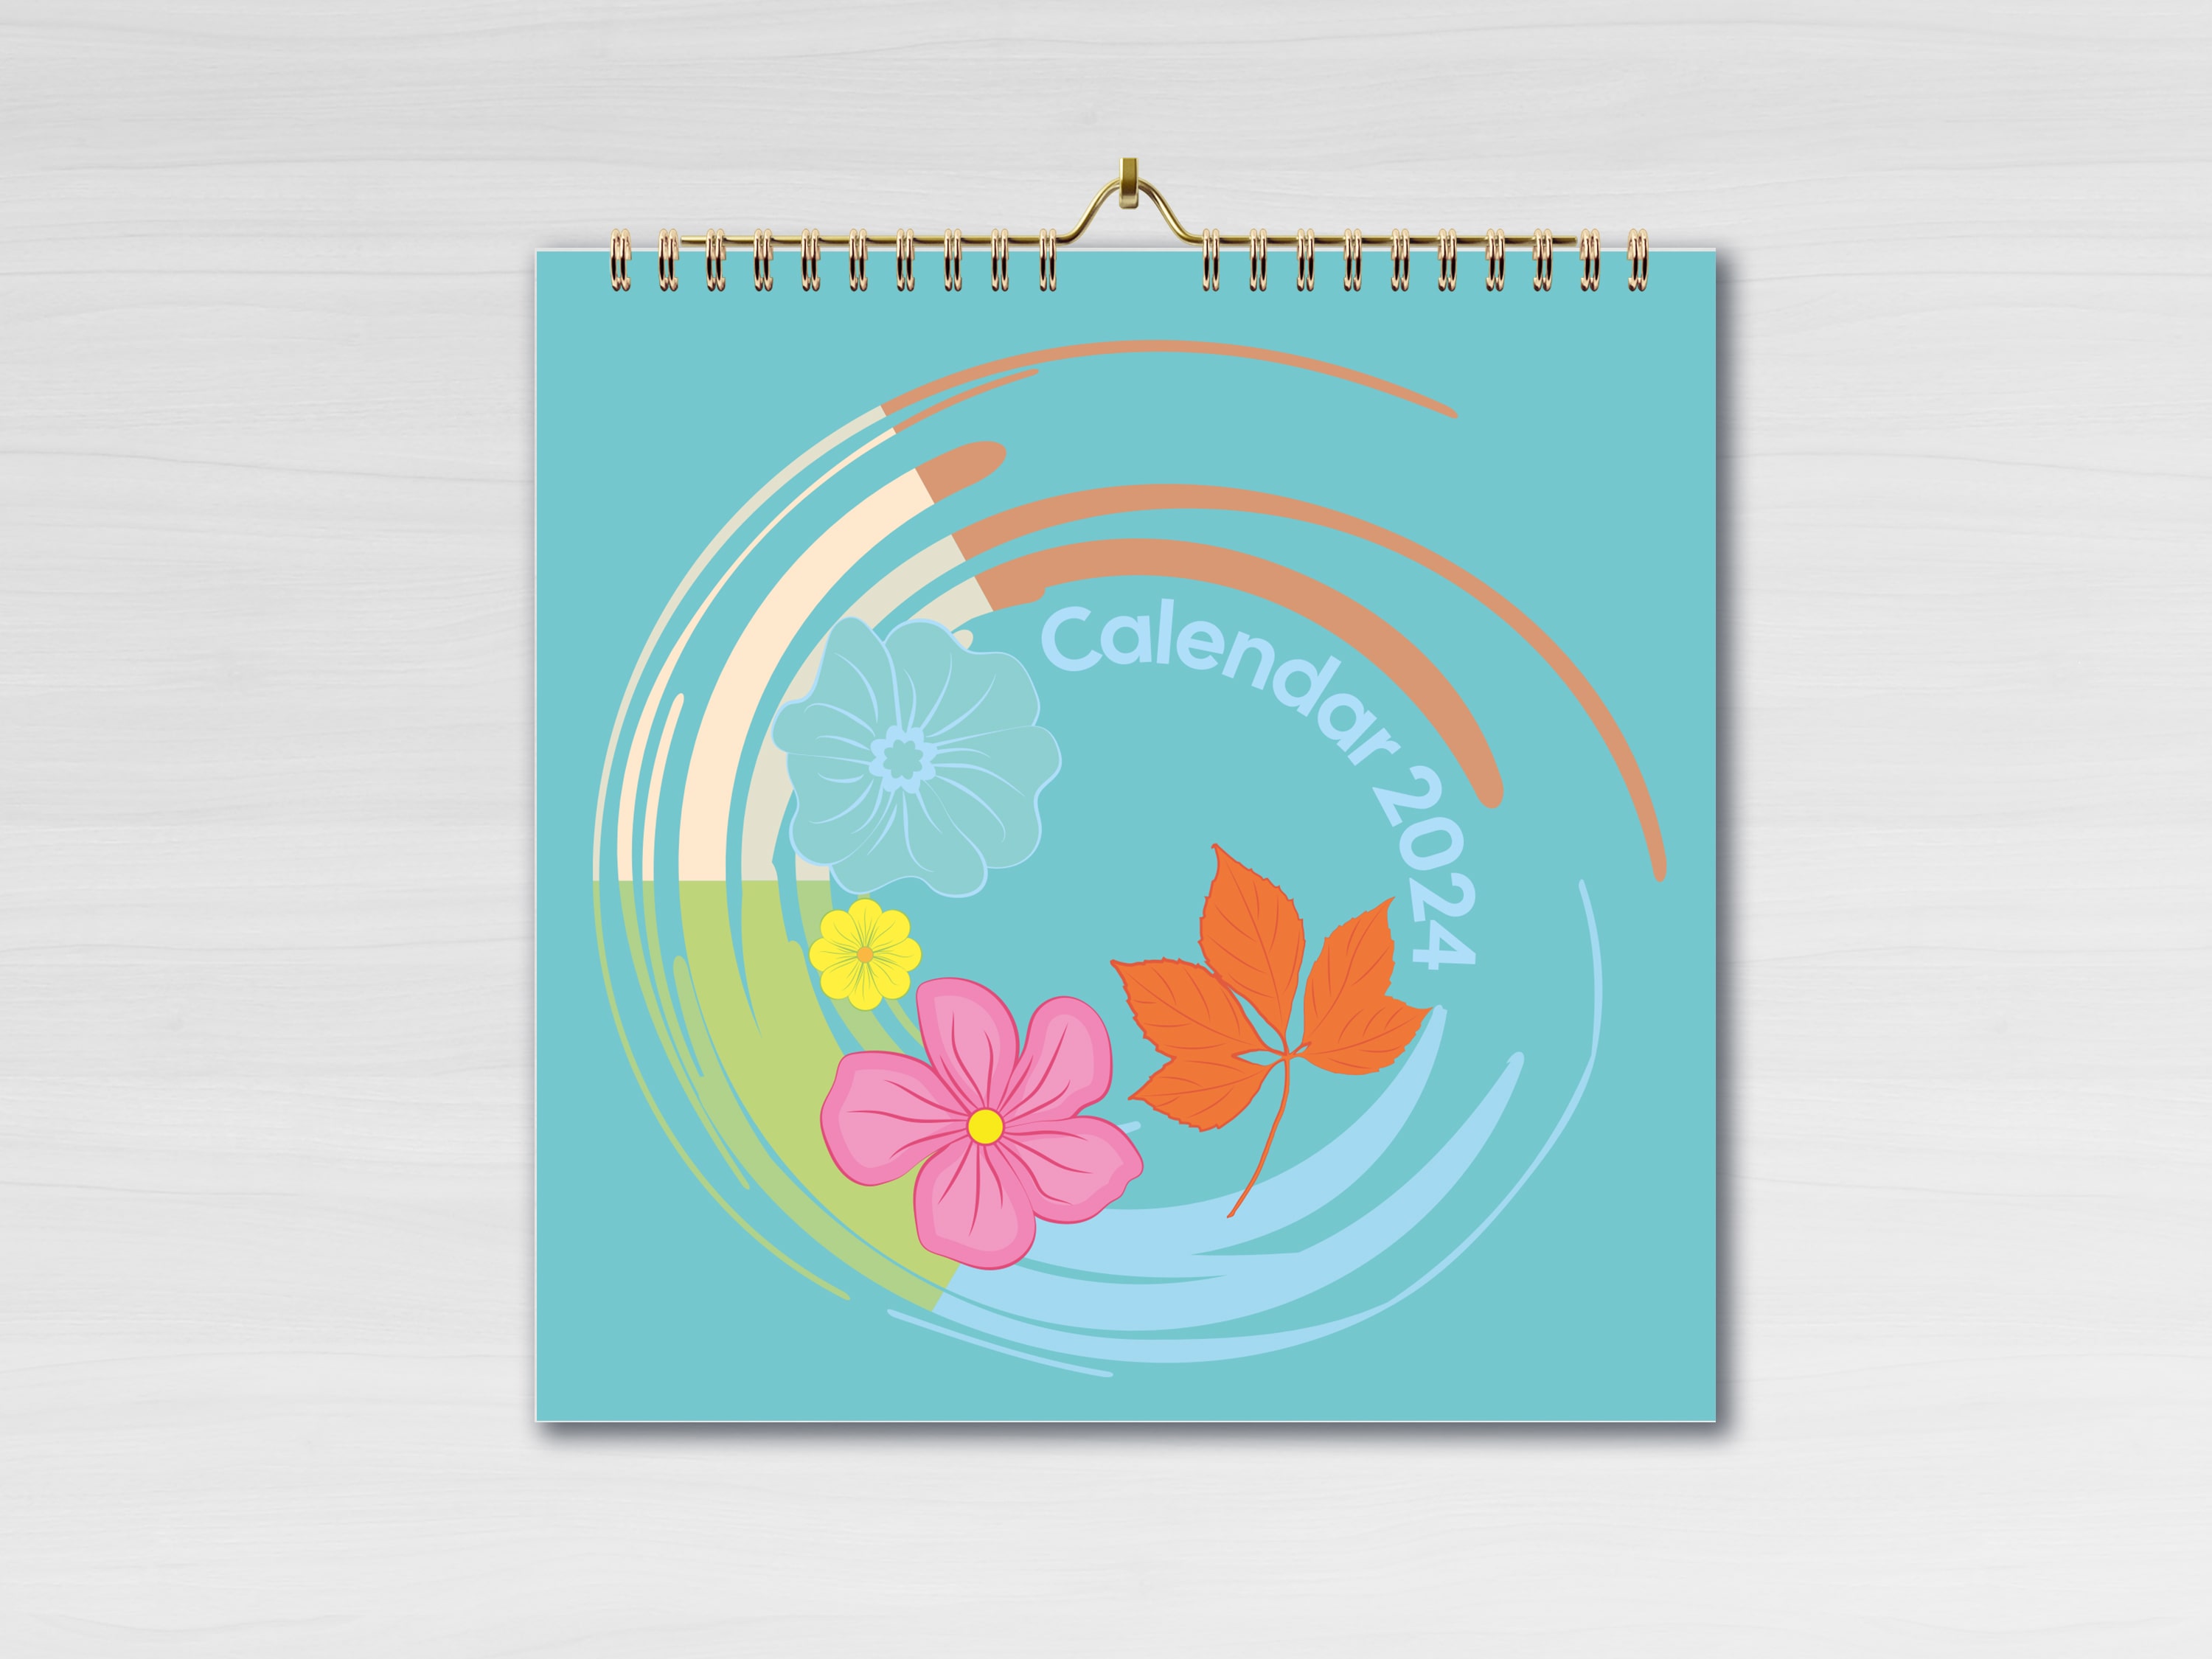 calendar 2024 numbers around the circle floral elements editable square pages 297x297 mm cover1 min 58